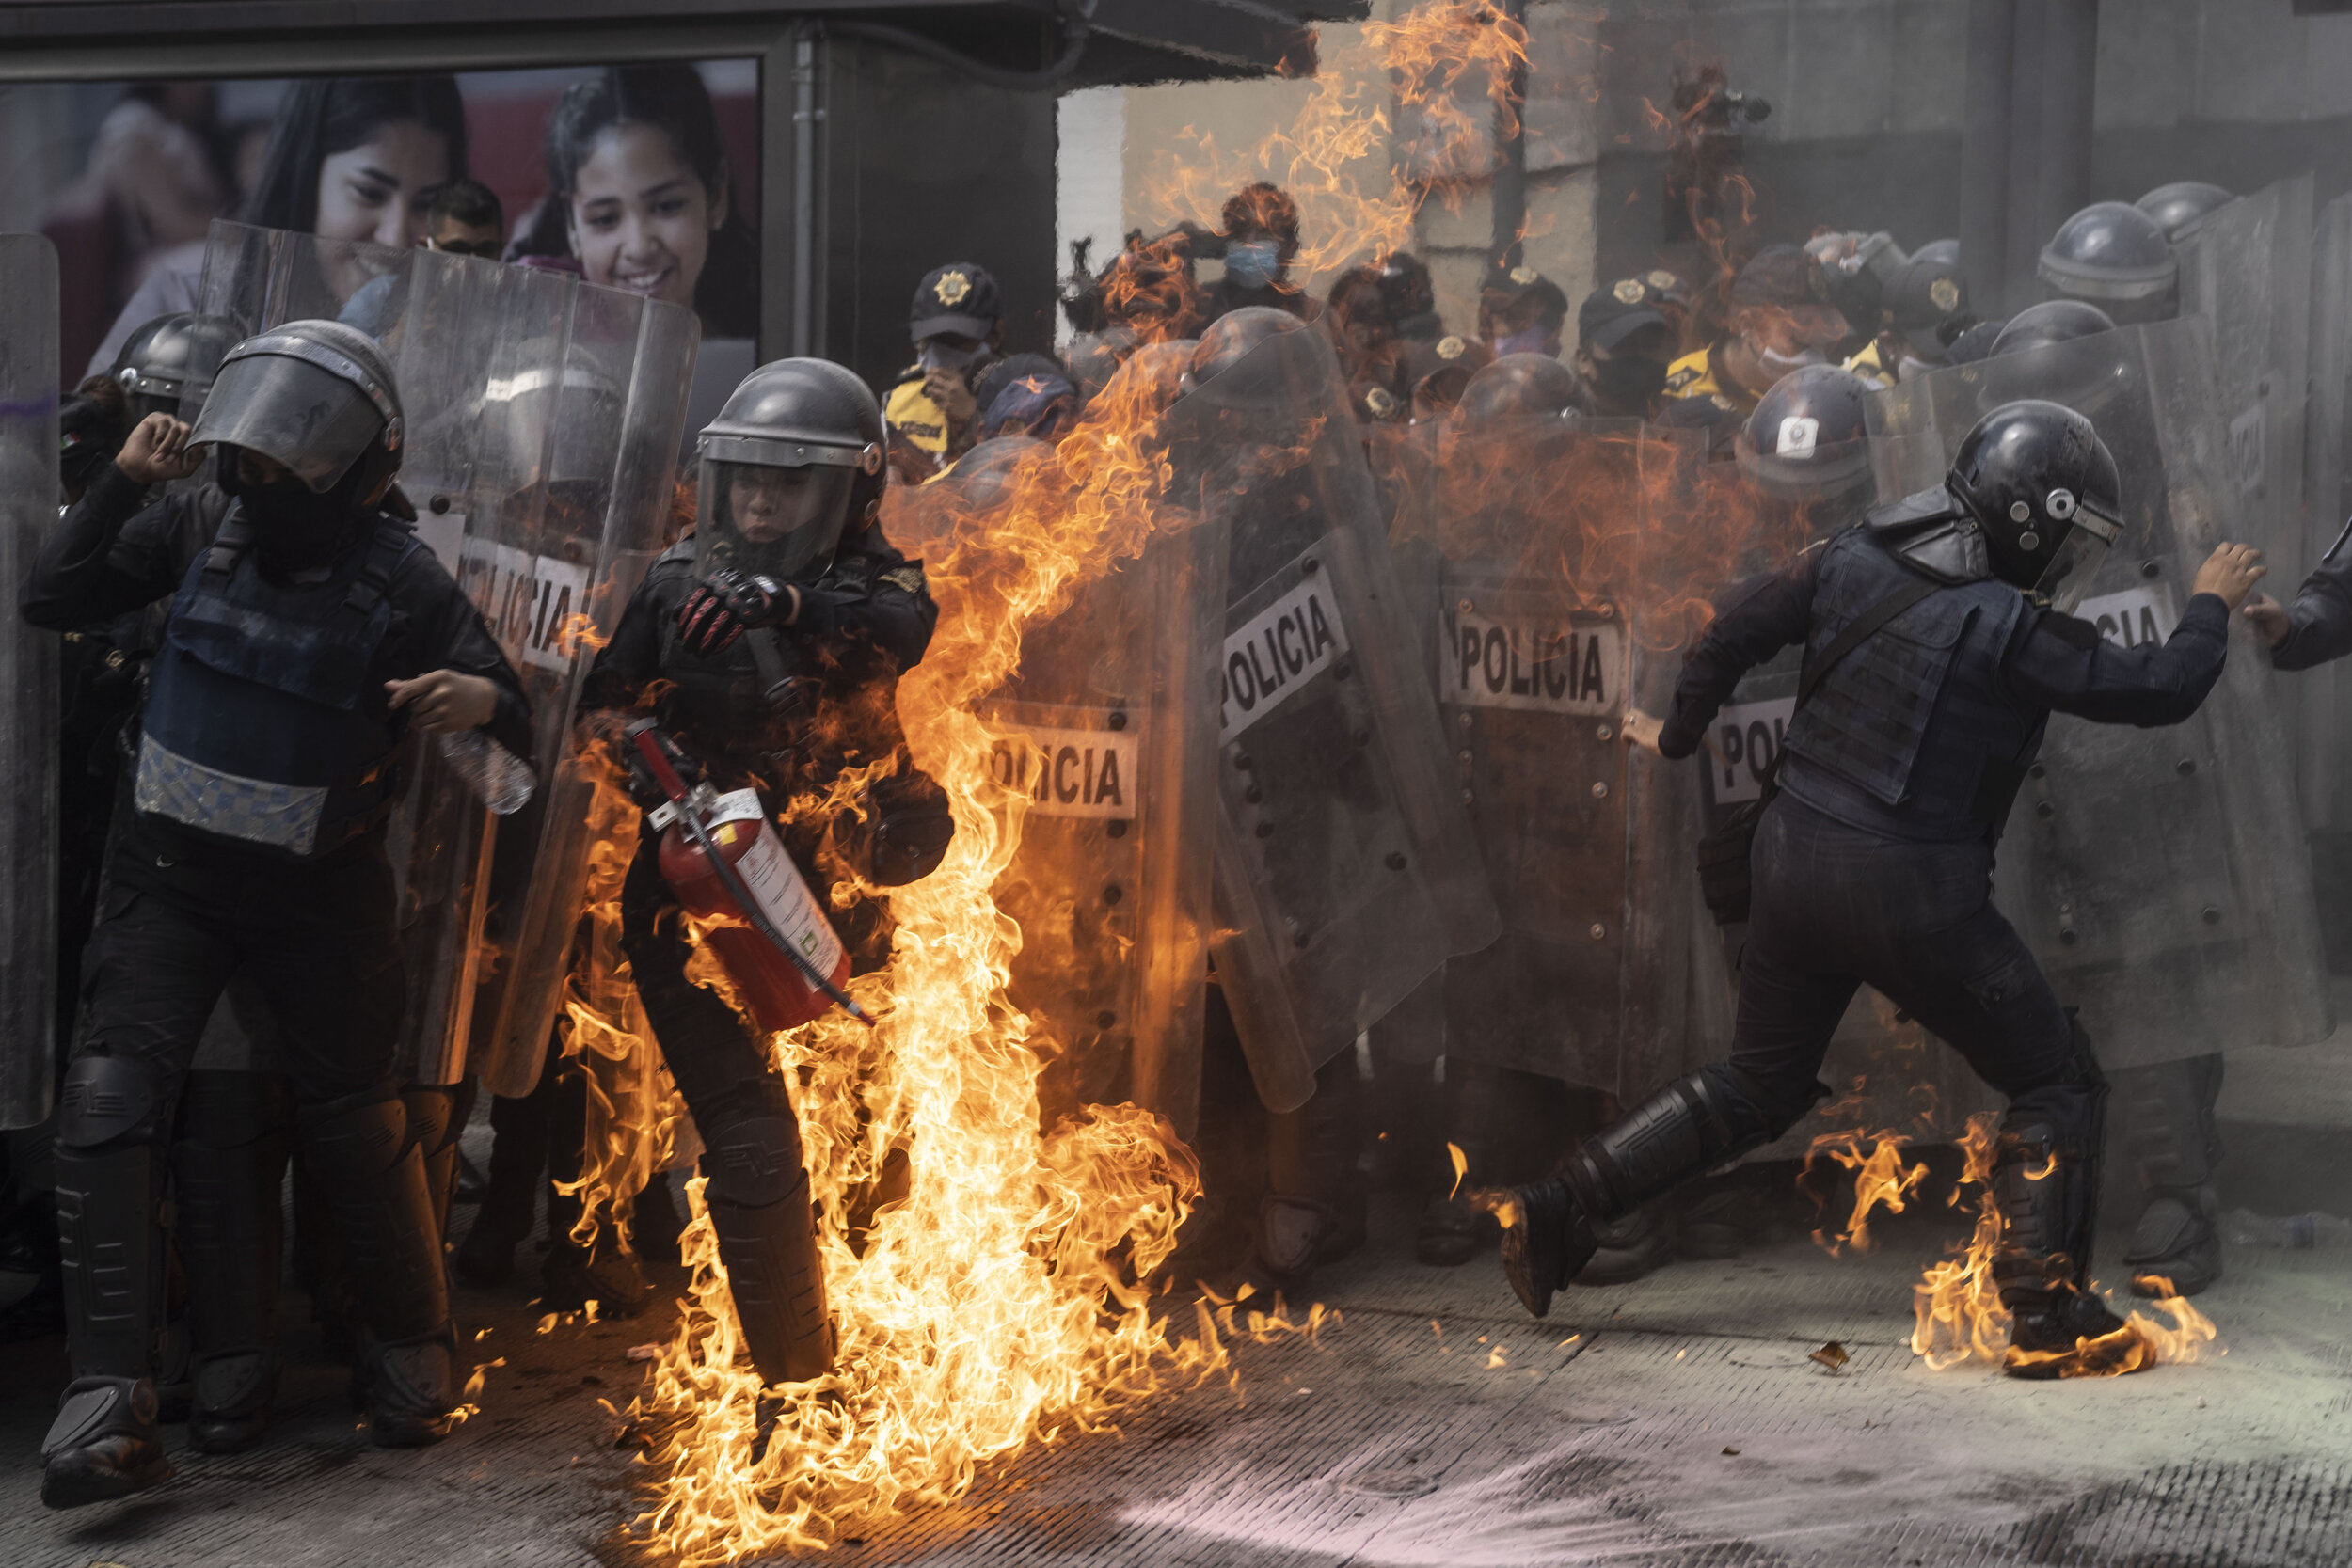   Riot police clash with a feminist collective during a protest in favor of abortion rights, Mexico City  